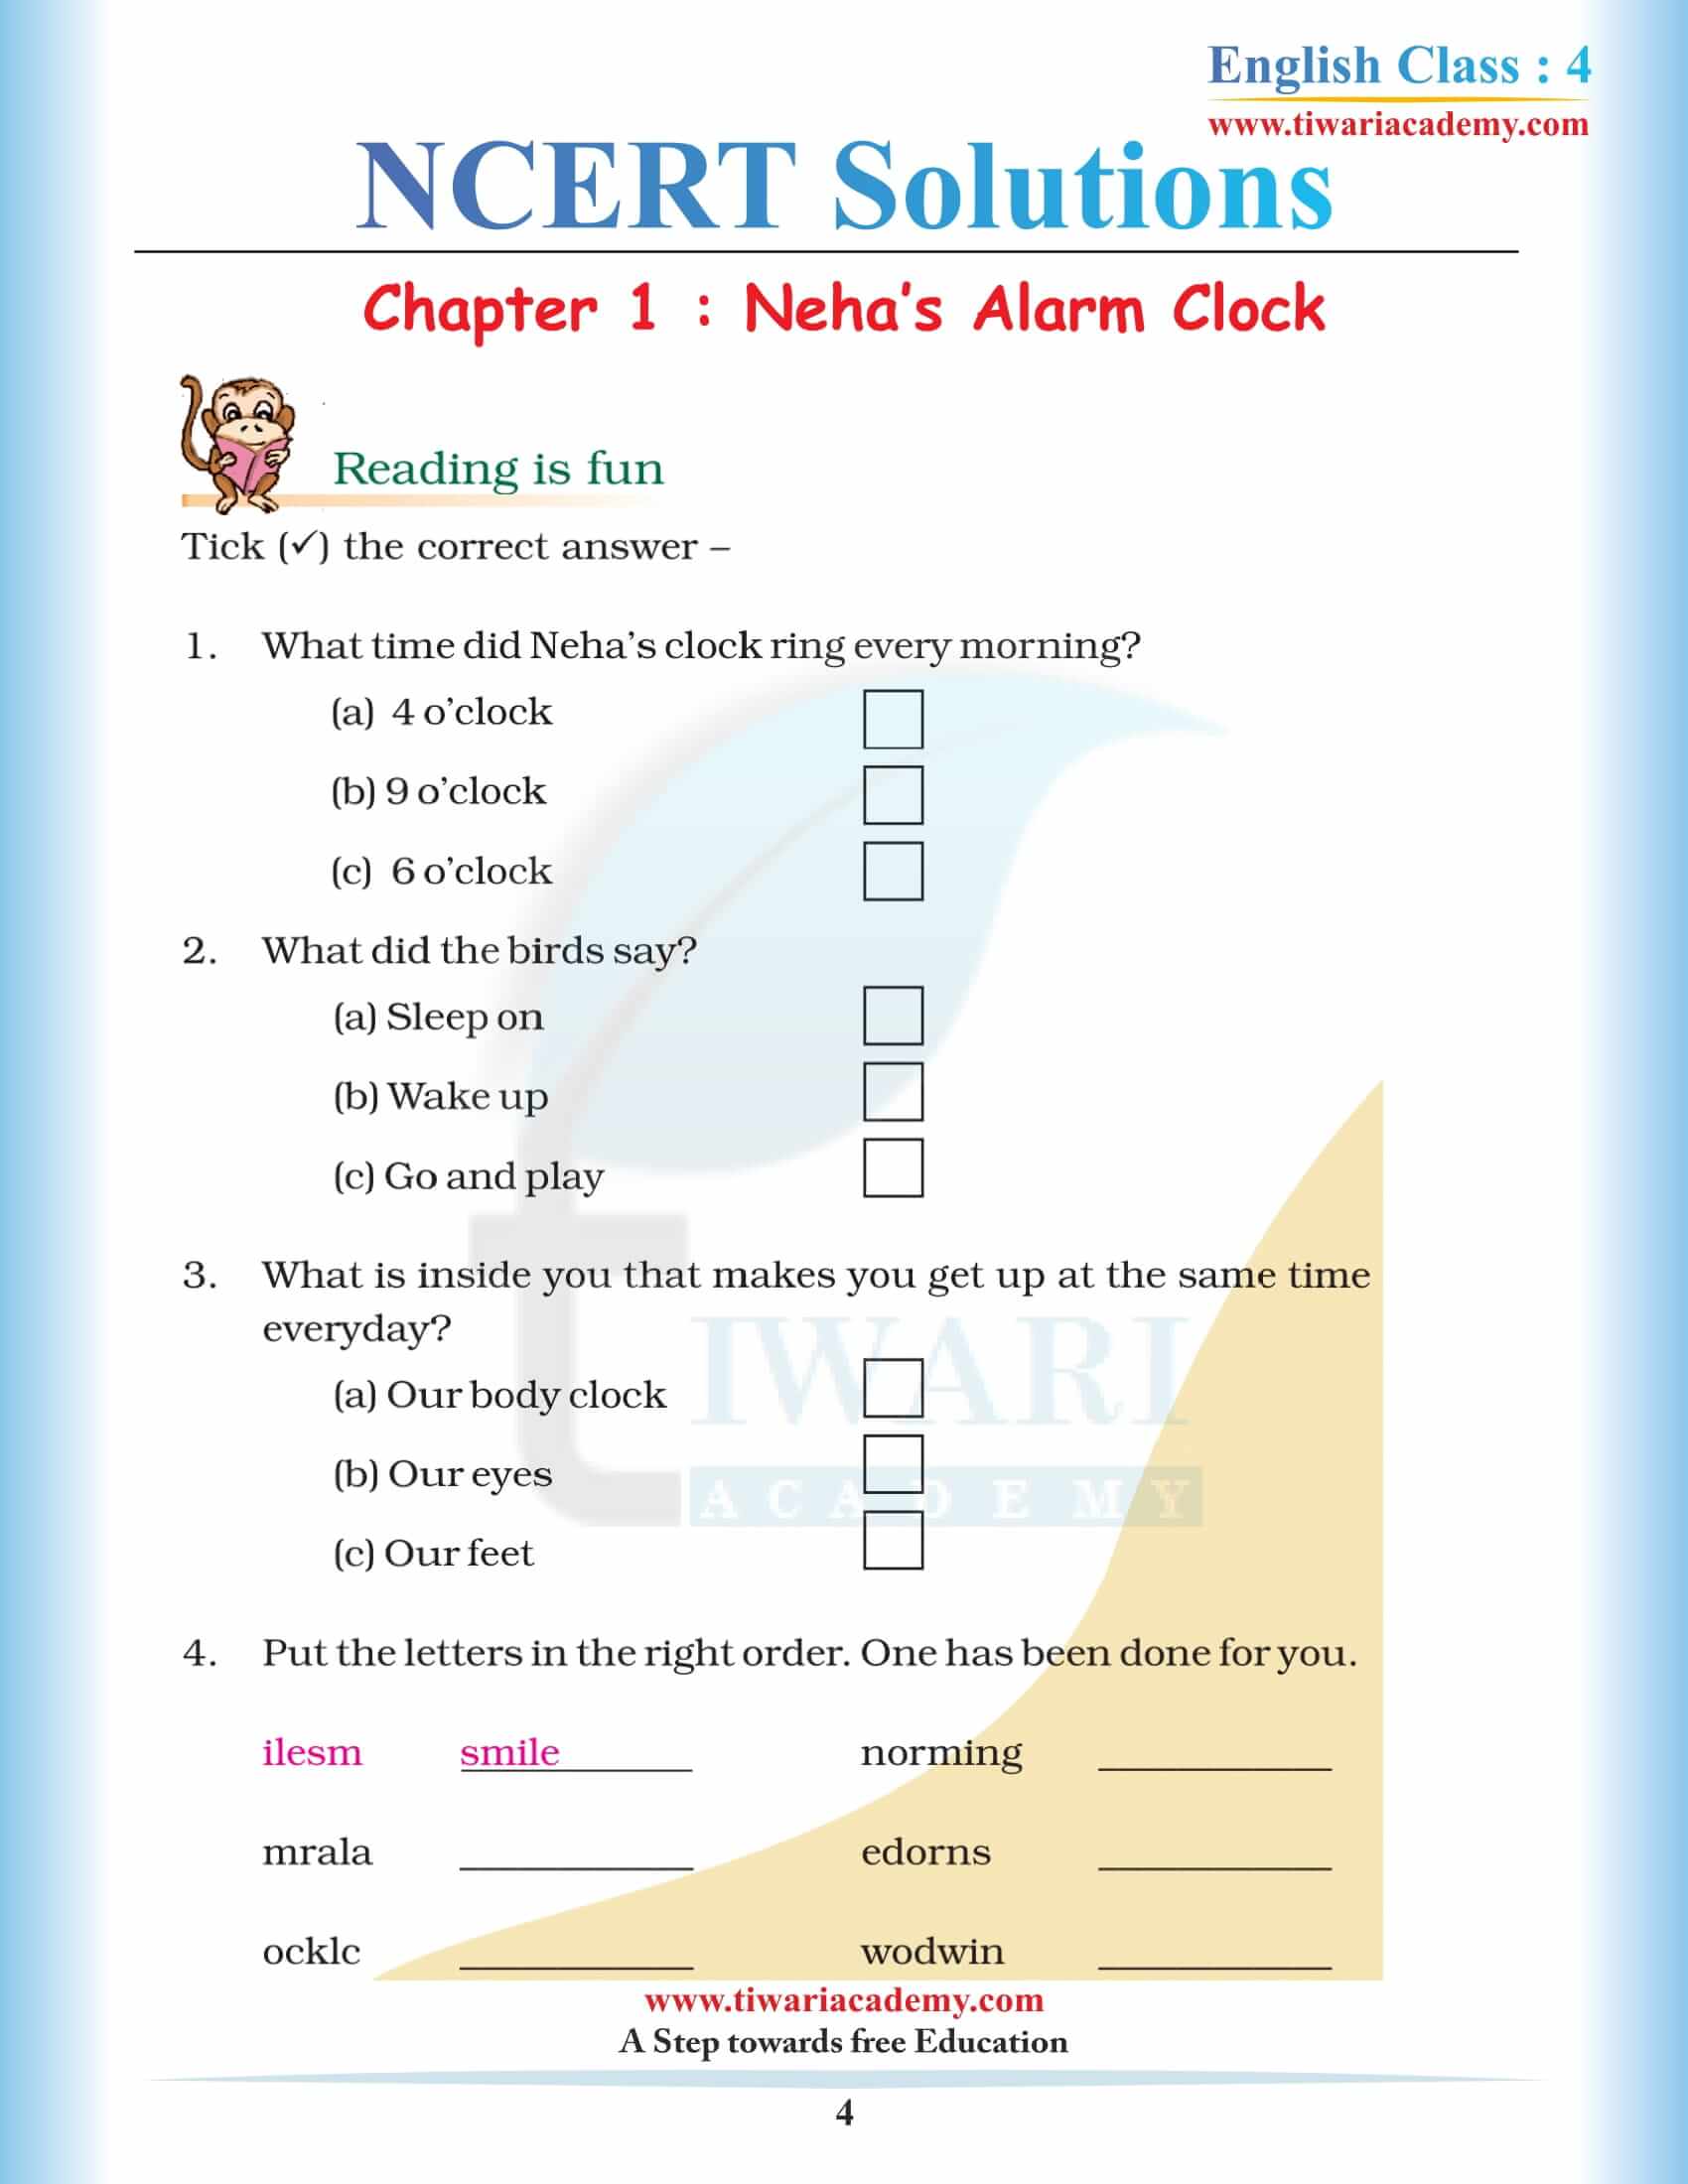 NCERT Solutions for Class 4 English Unit 1 Answers